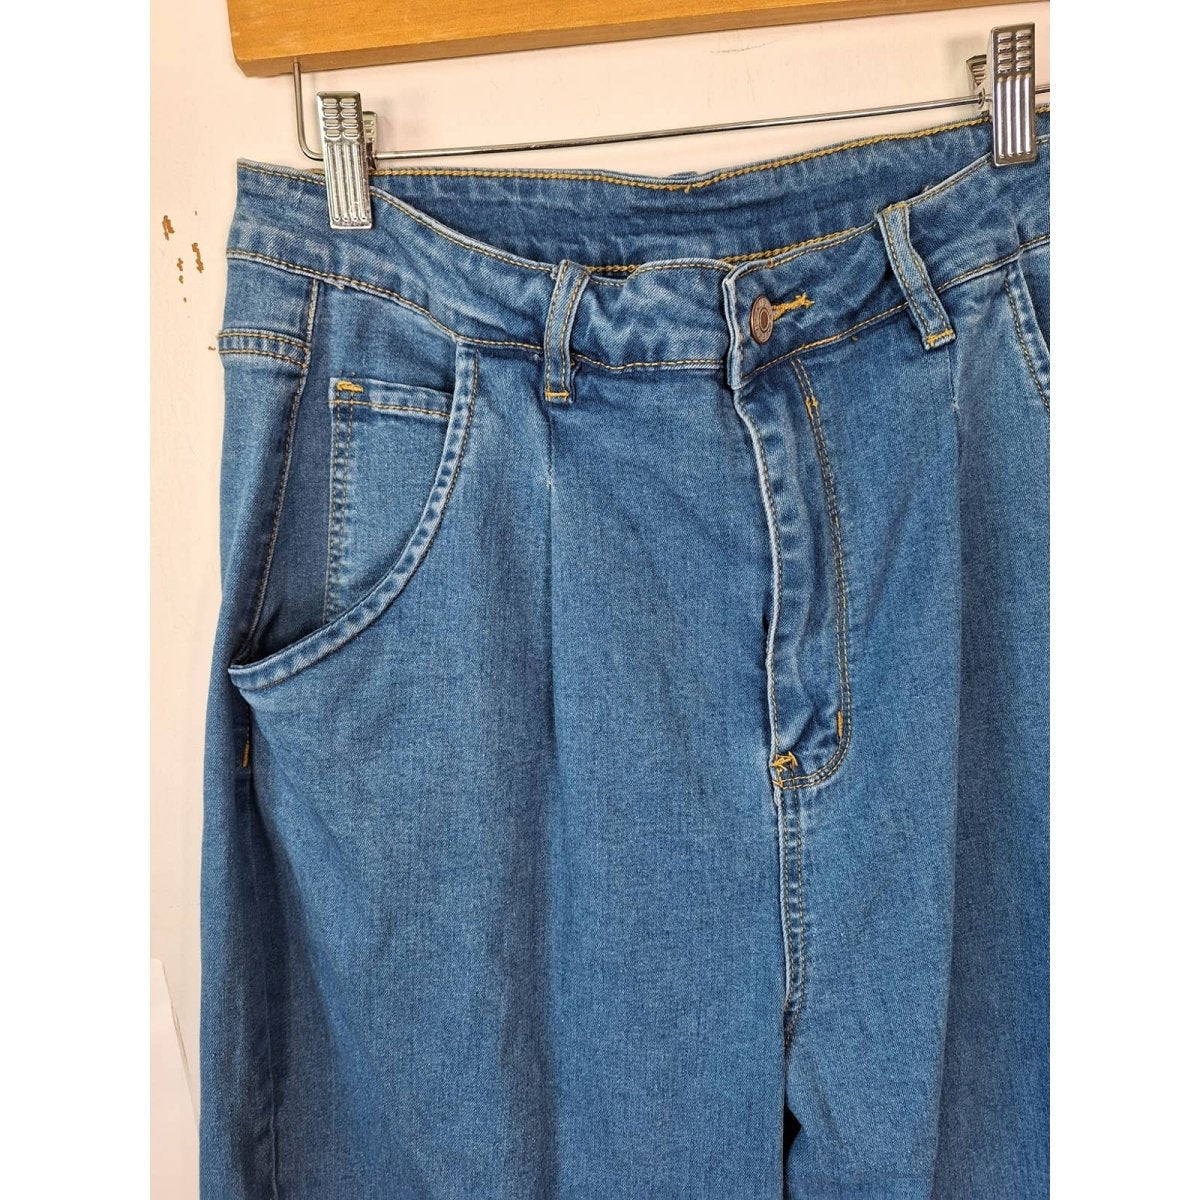 Modern Drop Crotch Tapered Jeans Size XL Waist 34" to 38" - themallvintage The Mall Vintage